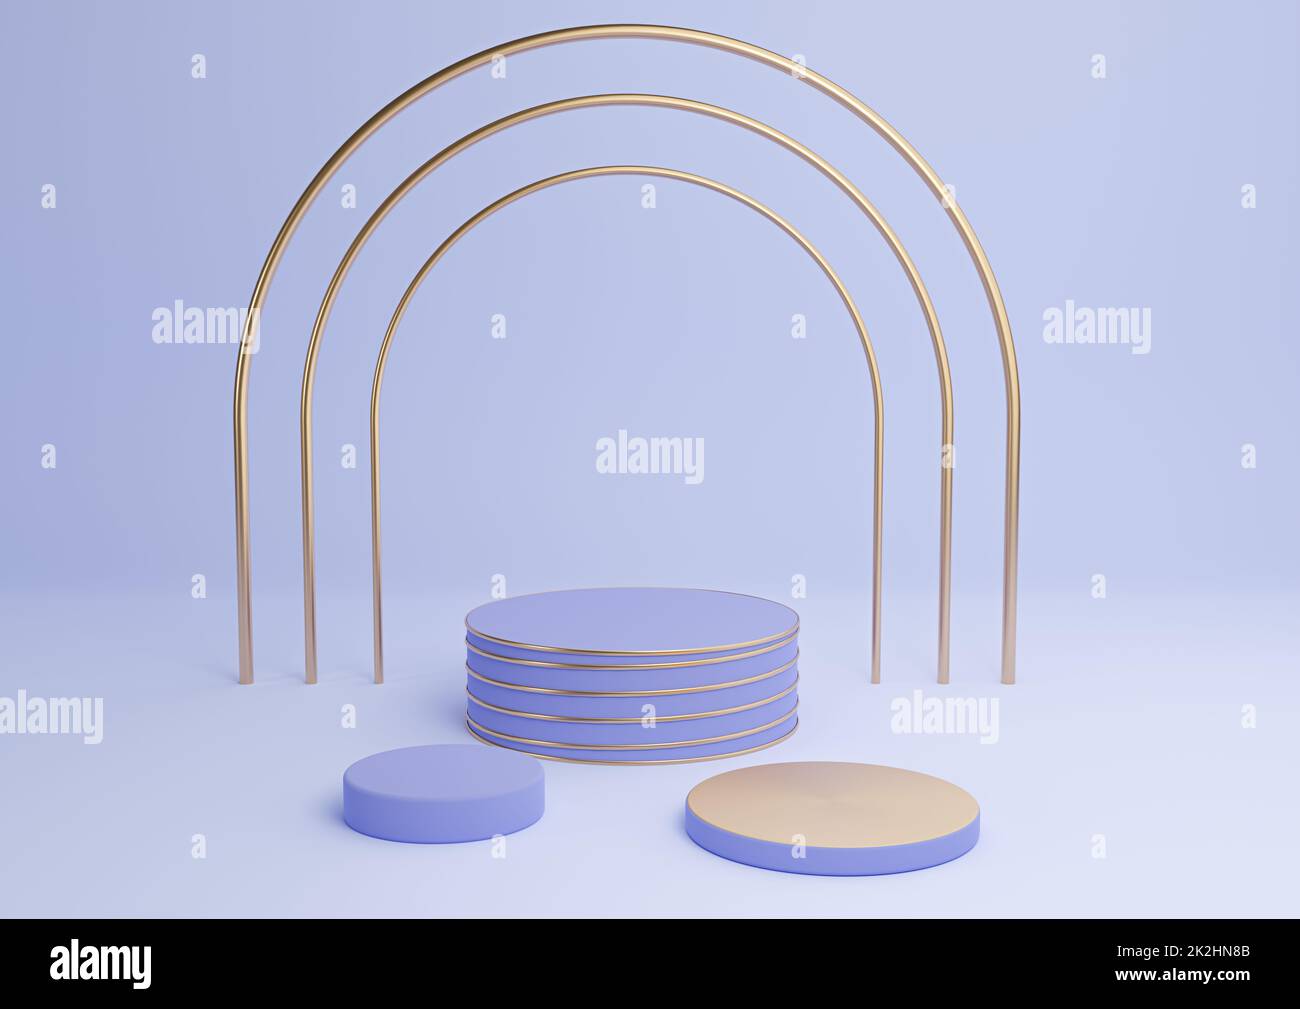 Light, pastel blue 3D rendering simple product display cylinder podiums with luxury gold arch and lines three stands minimal background abstract composition Stock Photo